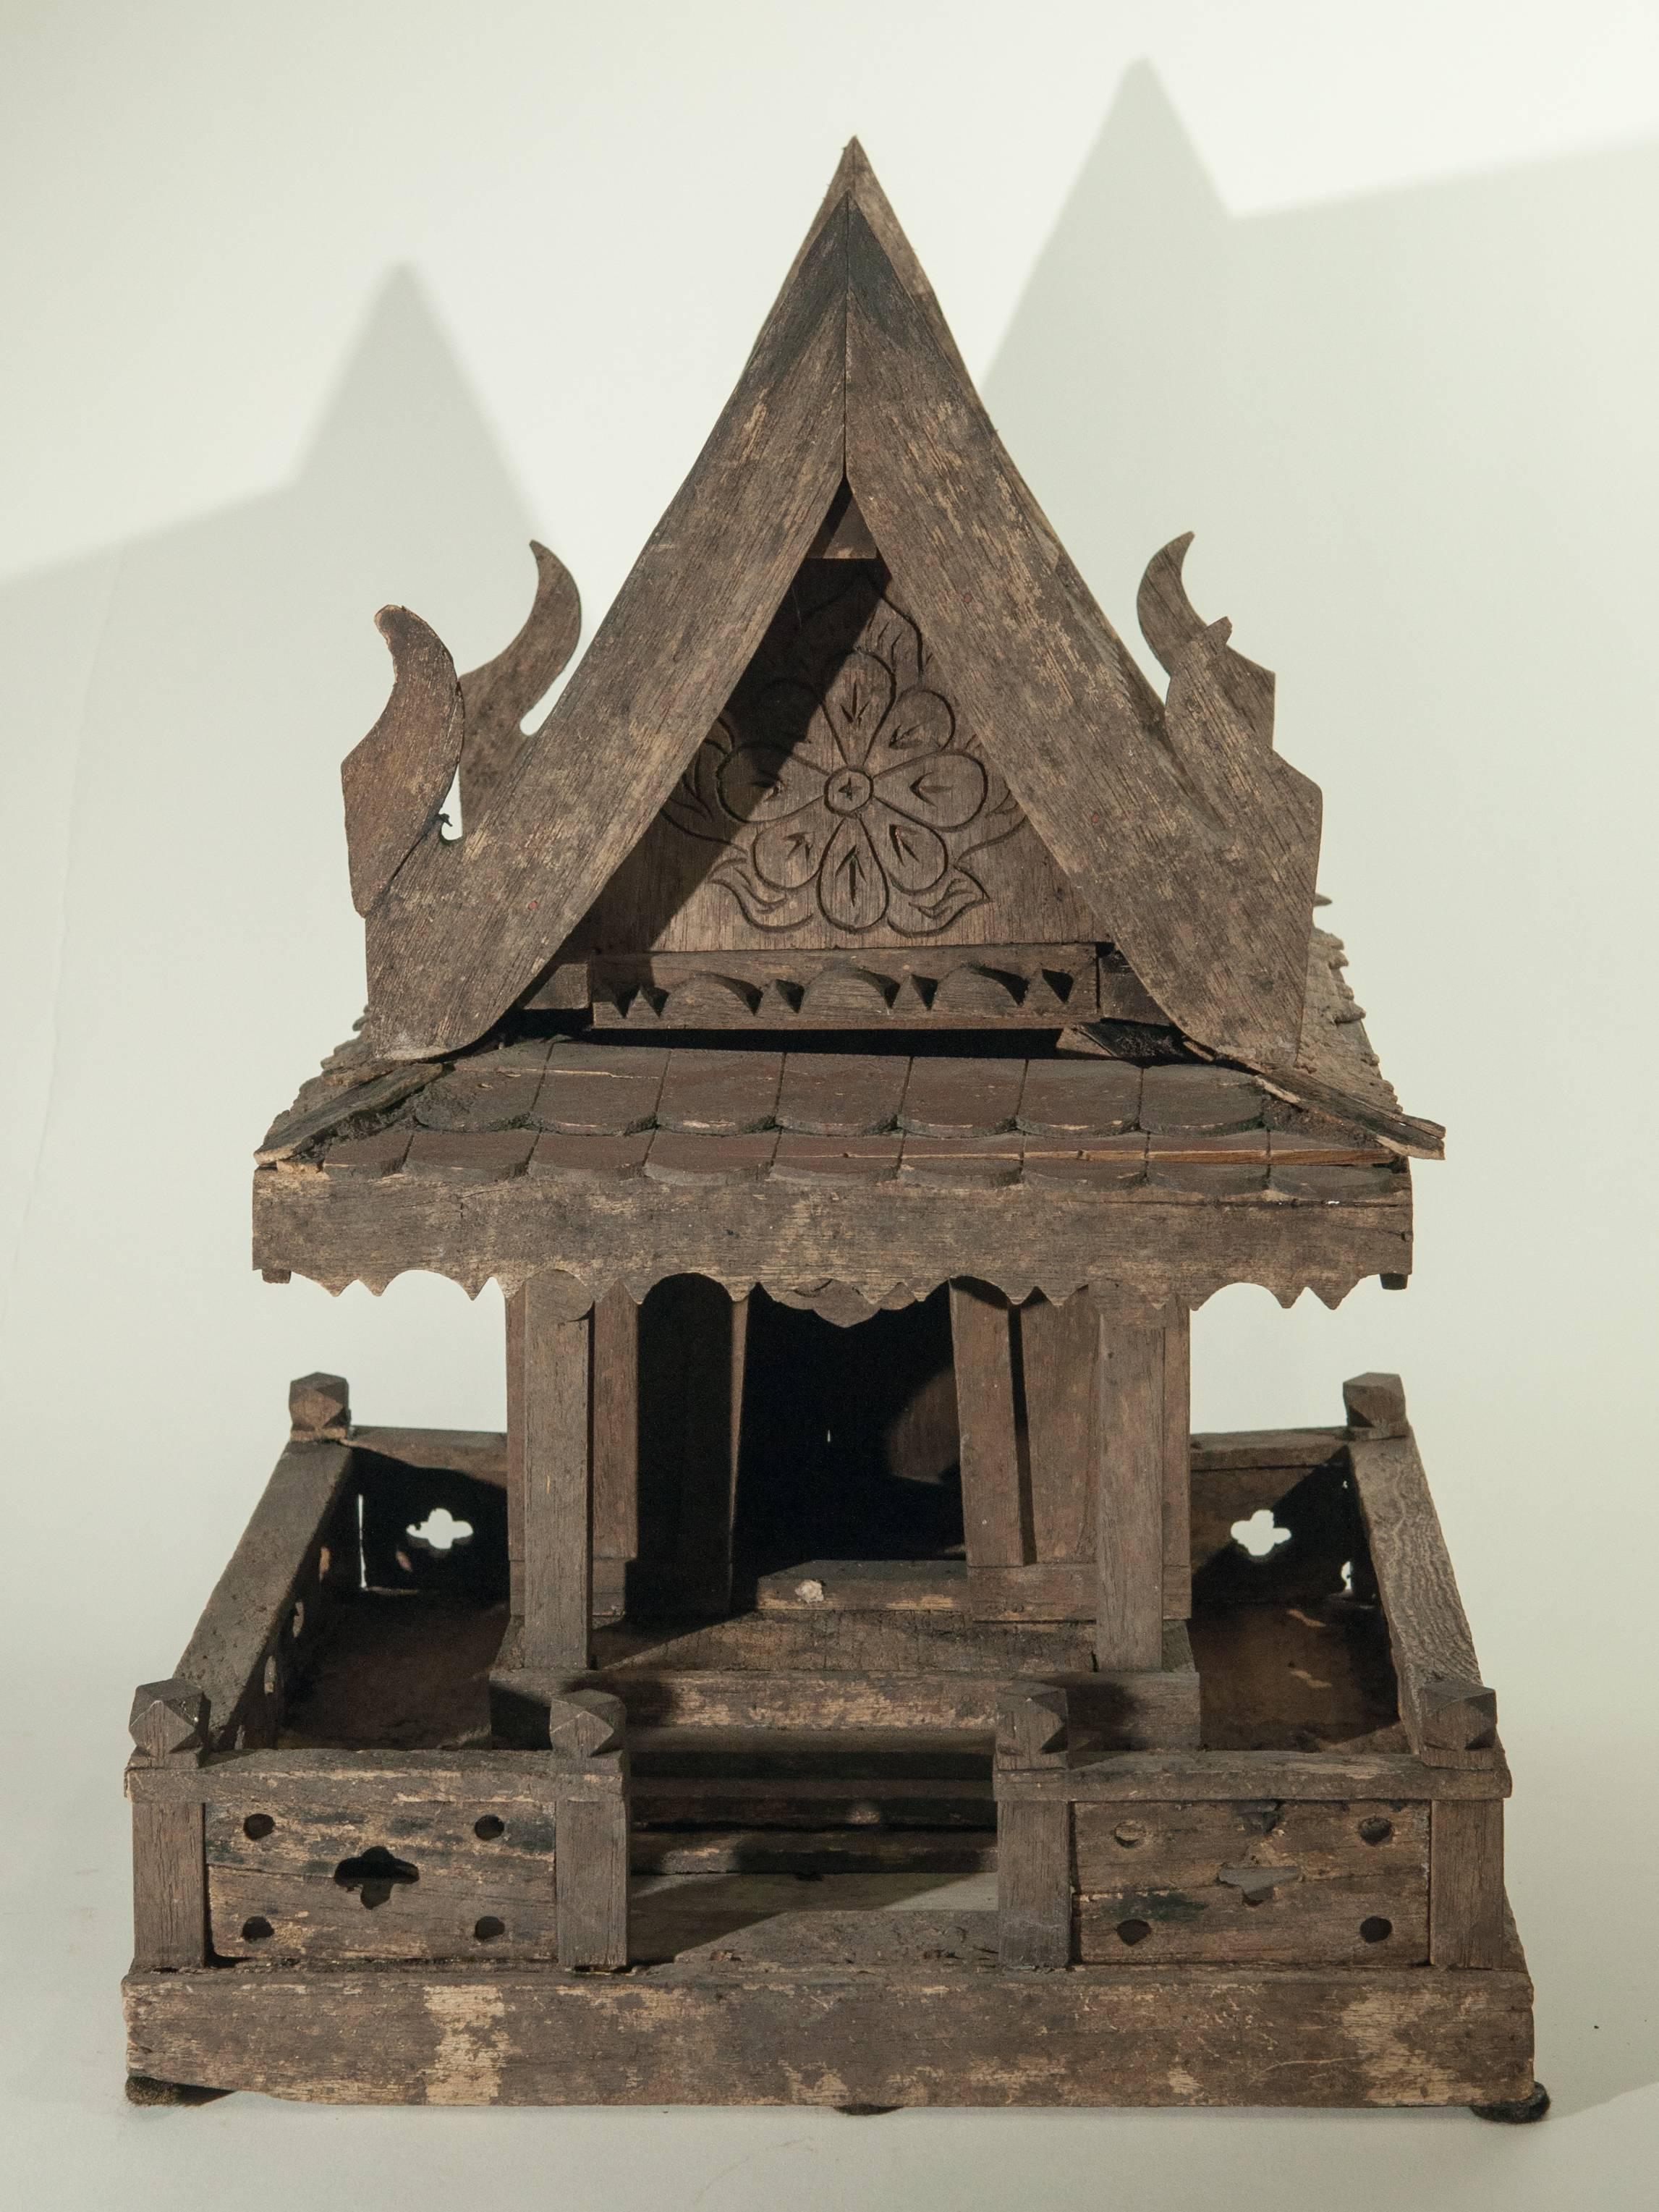 Spirit House from Northern Thailand. Teak, mid-late 20th century.
Offered by Bruce Hughes.
This rustic spirit house models a traditional Thai rural home, with a fence and porch, and incorporates the Naga motif bargeboards running along the edge of